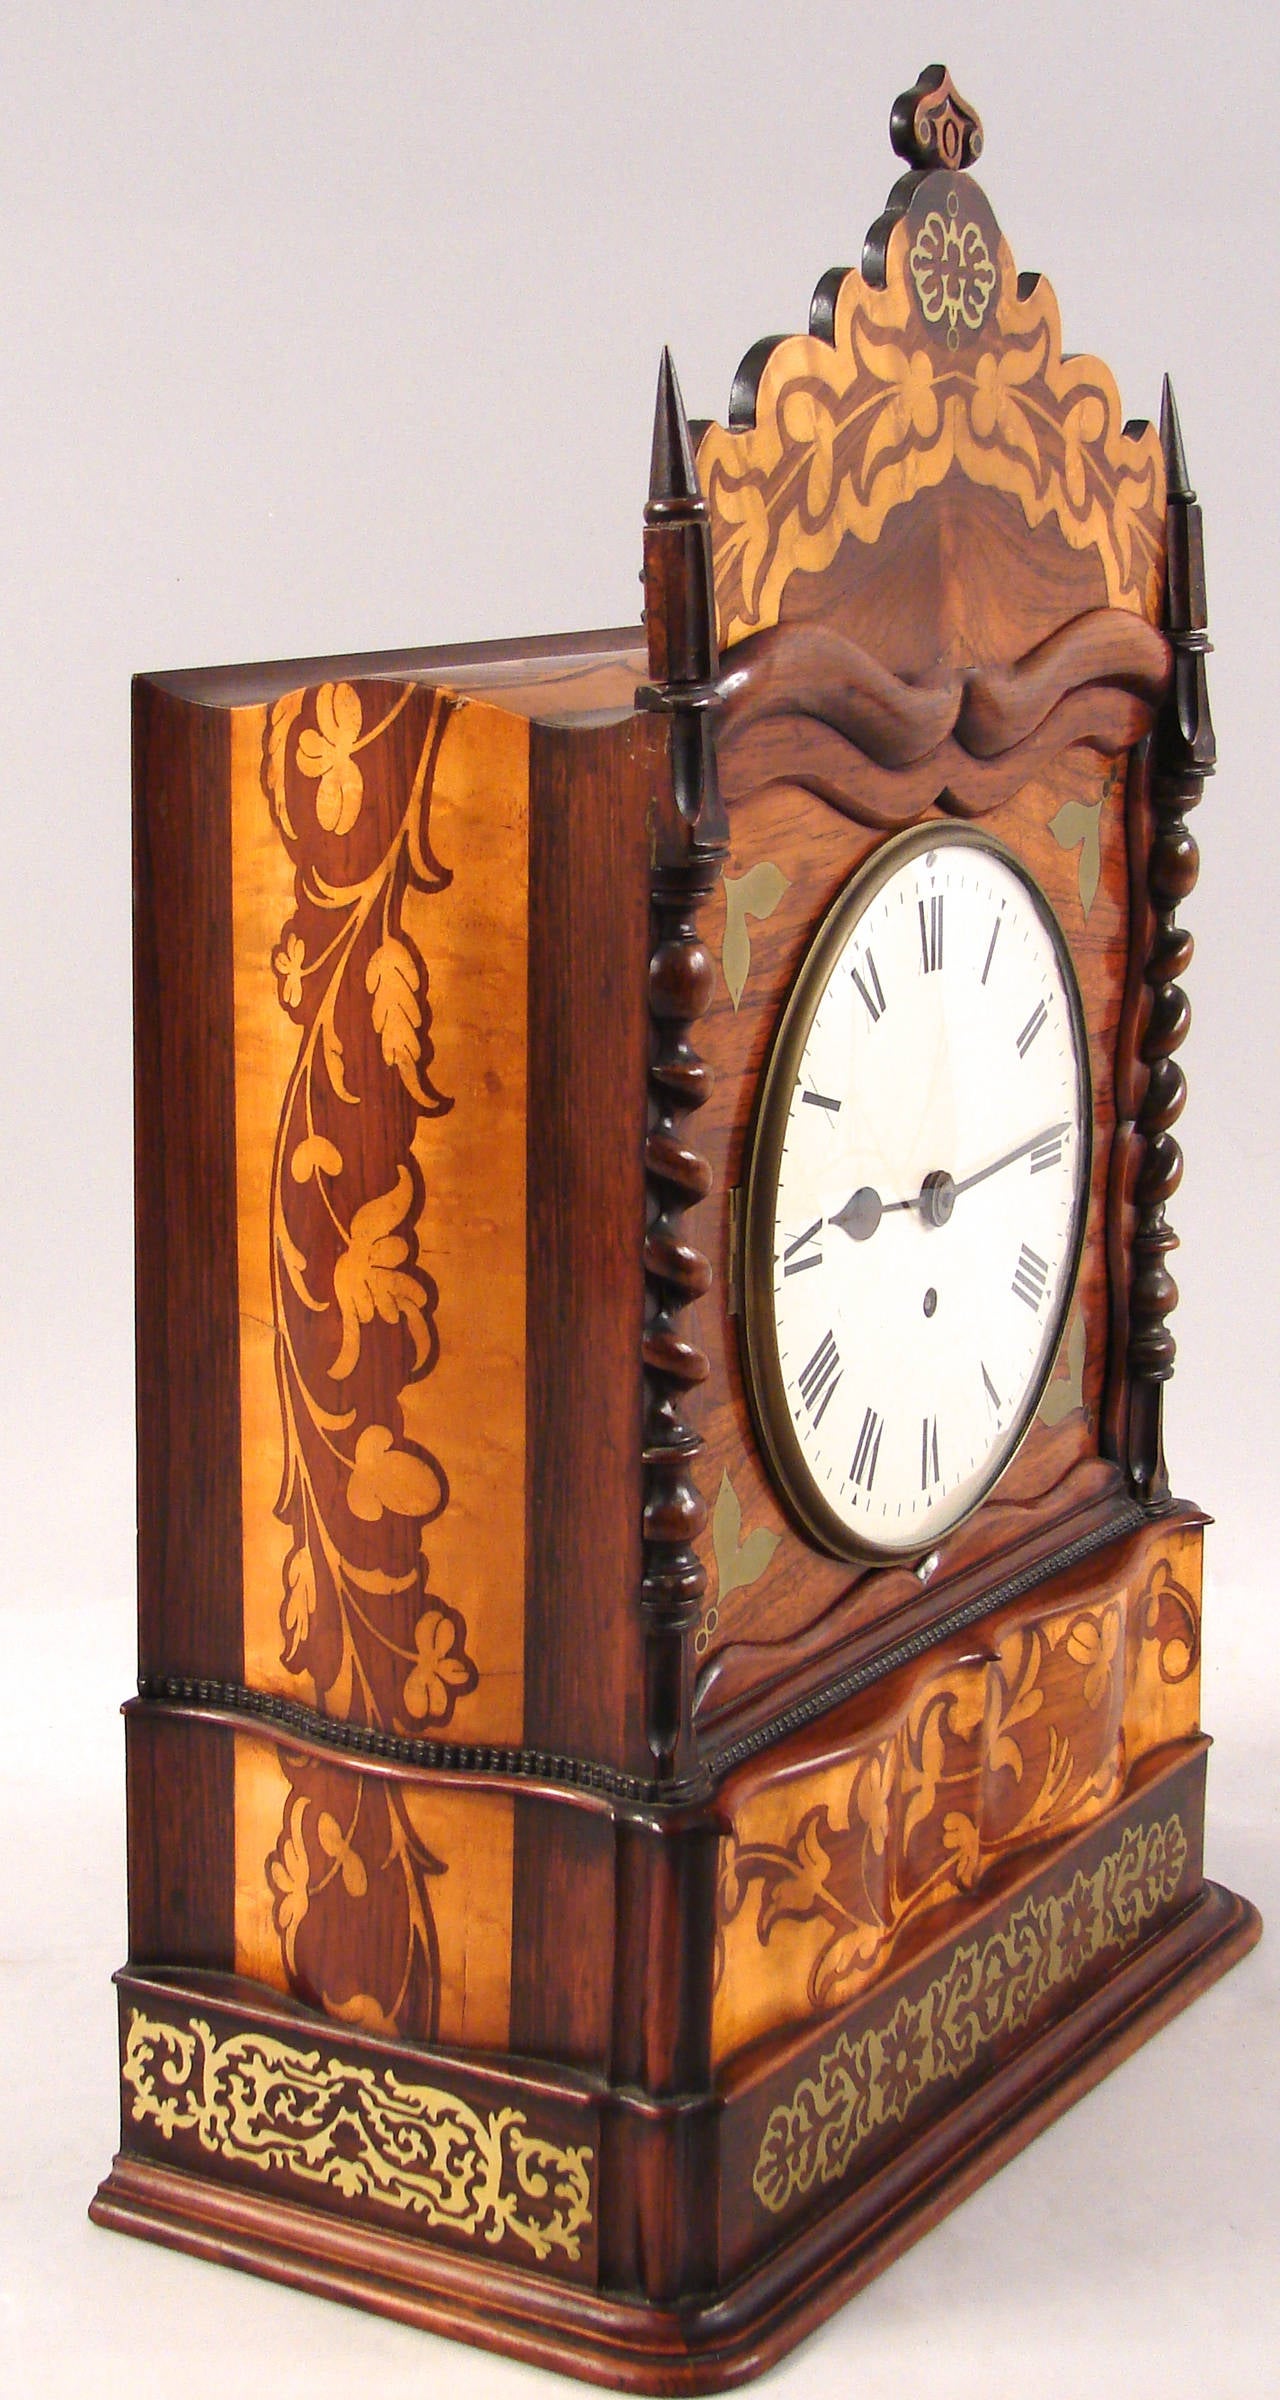 An unusual and rare Irish (Killarney) arbitus, yew wood, satinwood inlaid 8 day movement clock of architectural form, the removable cresting above a simple dial with Roman numerals flanked by twisted columns on a foliate inlaid plinth. Recently